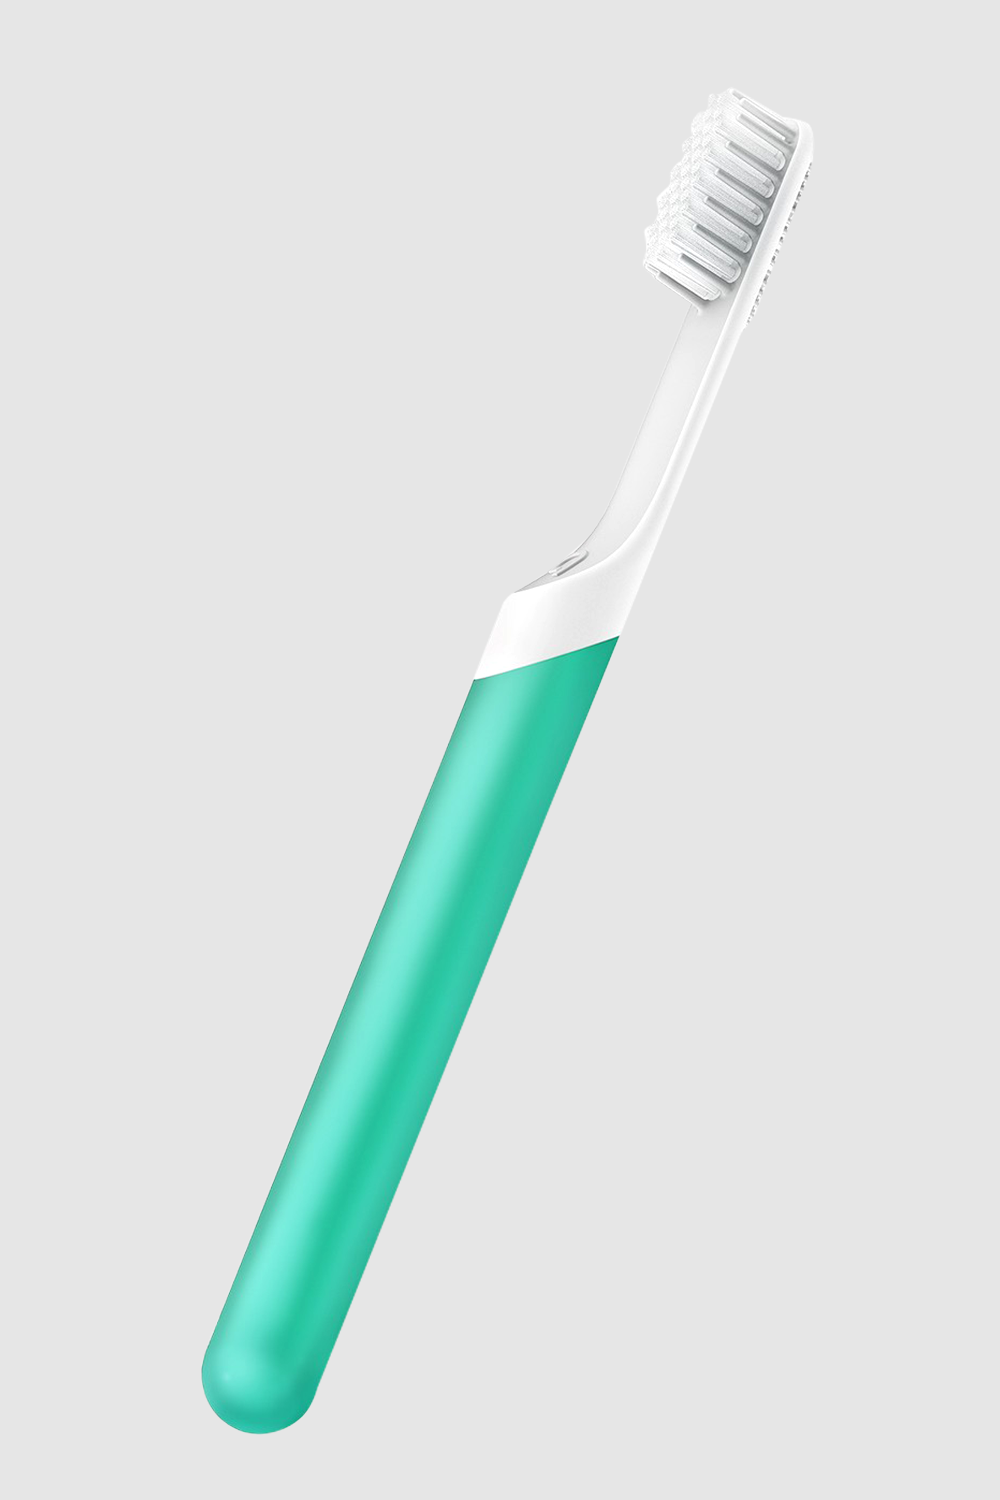 are quip toothbrushes any good